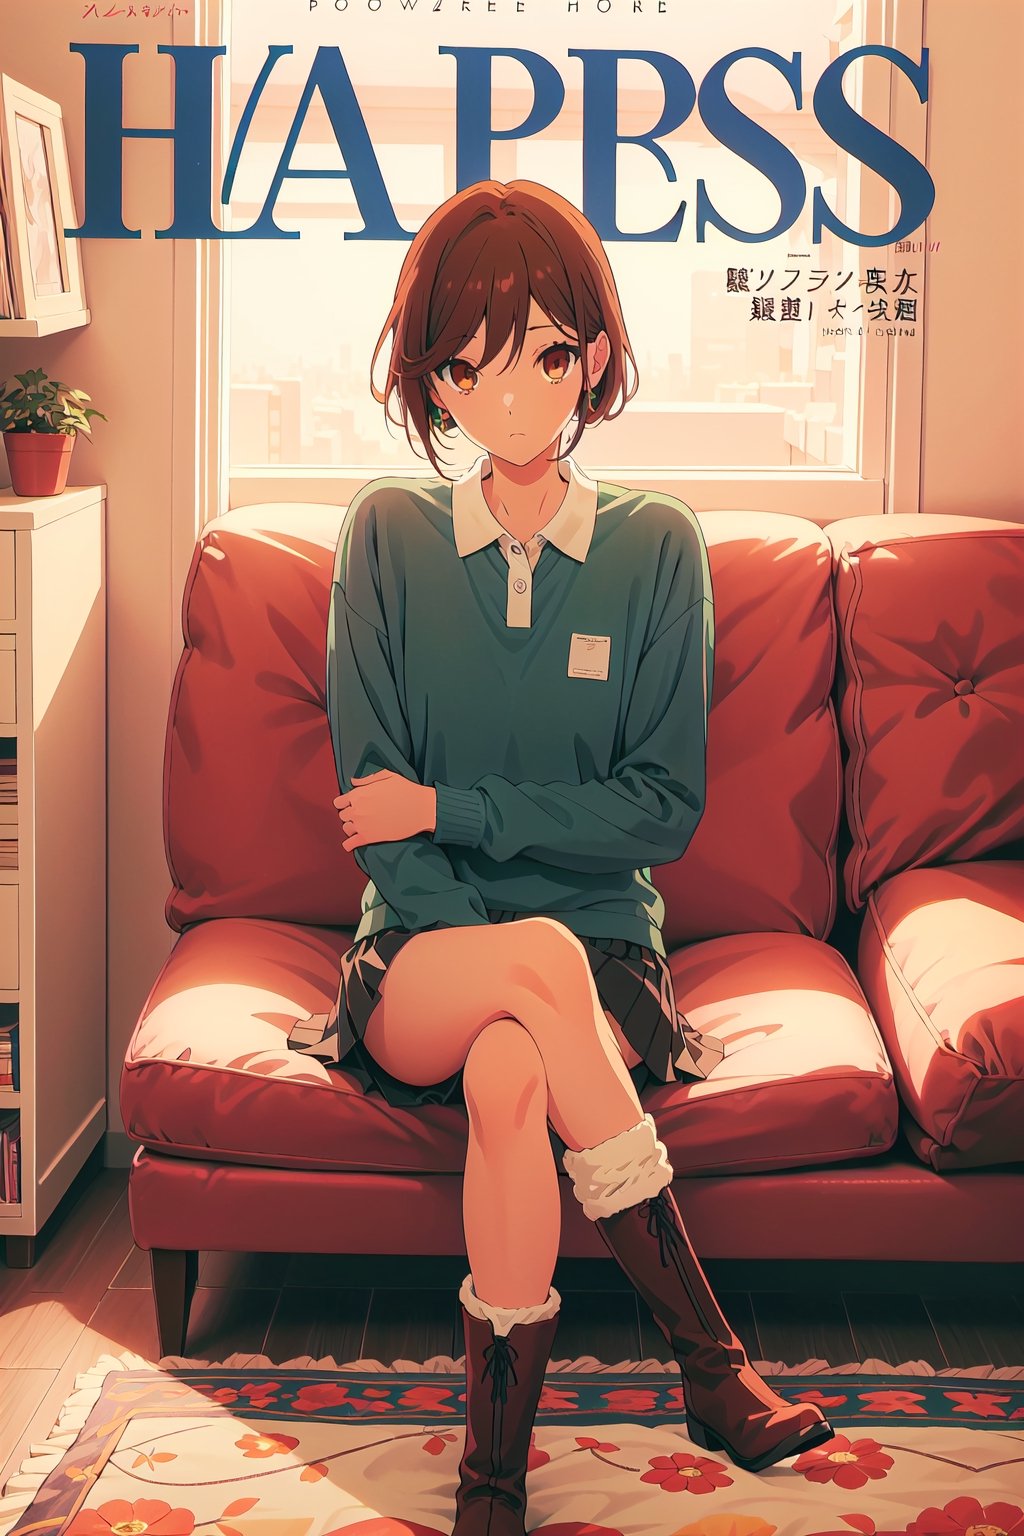 horimiya_hori,1girl ,brown eyes,
vintage hairstyle,magazine cover,modeling pose, foreground,oversized long sleeve polo shirt tucked under skirt,tight skirt,vintage boots,leg warmers,sitting,pov_eye_contact,crossed legs,sofa,
hands on ears